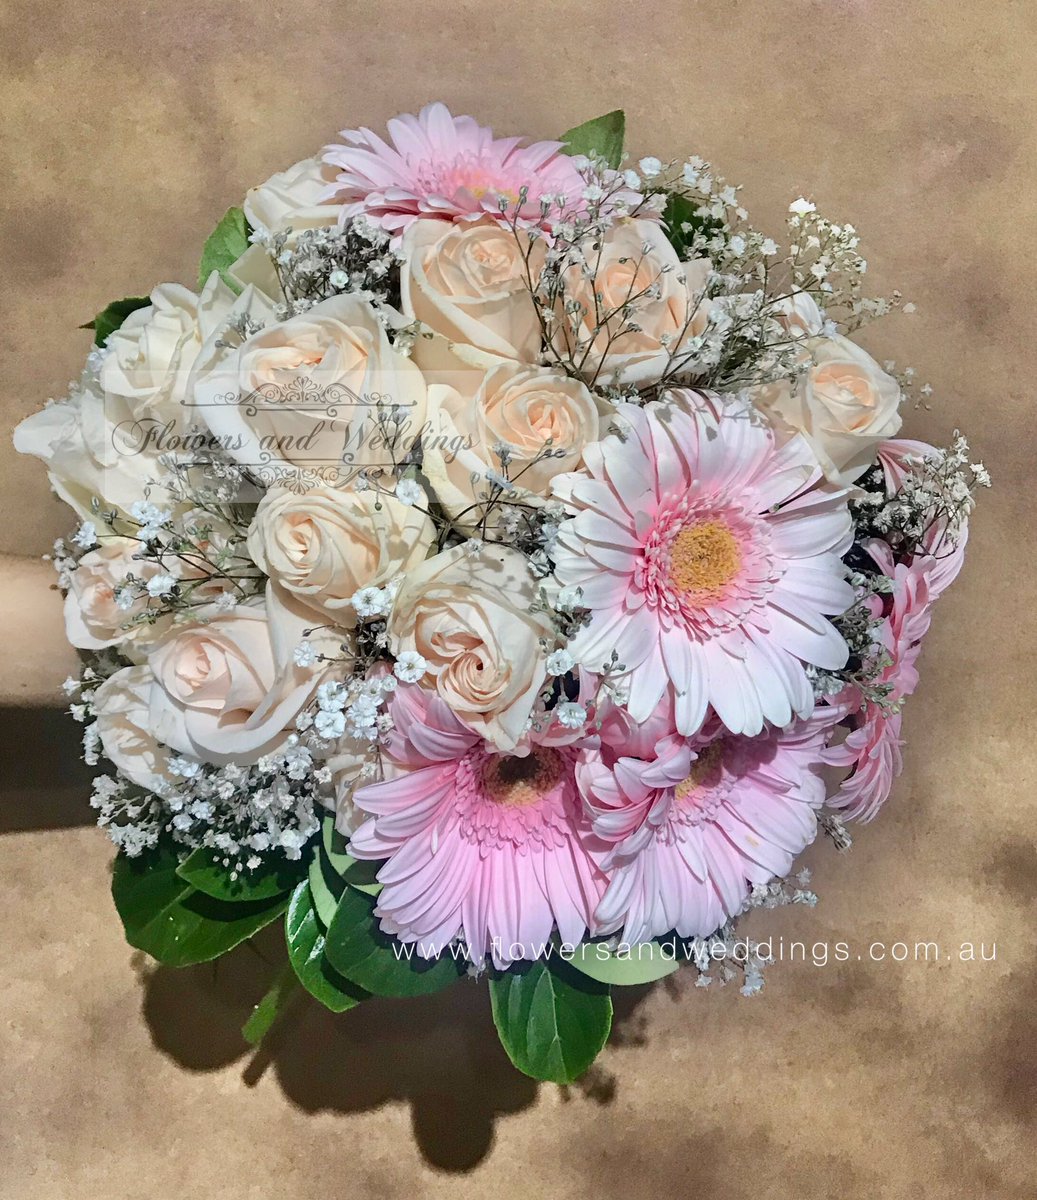 Bouquet with roses, gerbera & baby’s breath #wedding #weddingflowers #weddingflower #simpleweddingflower #bouquet #bouquetofflowers #bridalbouquet #bouquetforbride #bouquets #bouquetinspo #bouquetoftheday #bouquetwedding #weddingbouquet #weddingbouquets